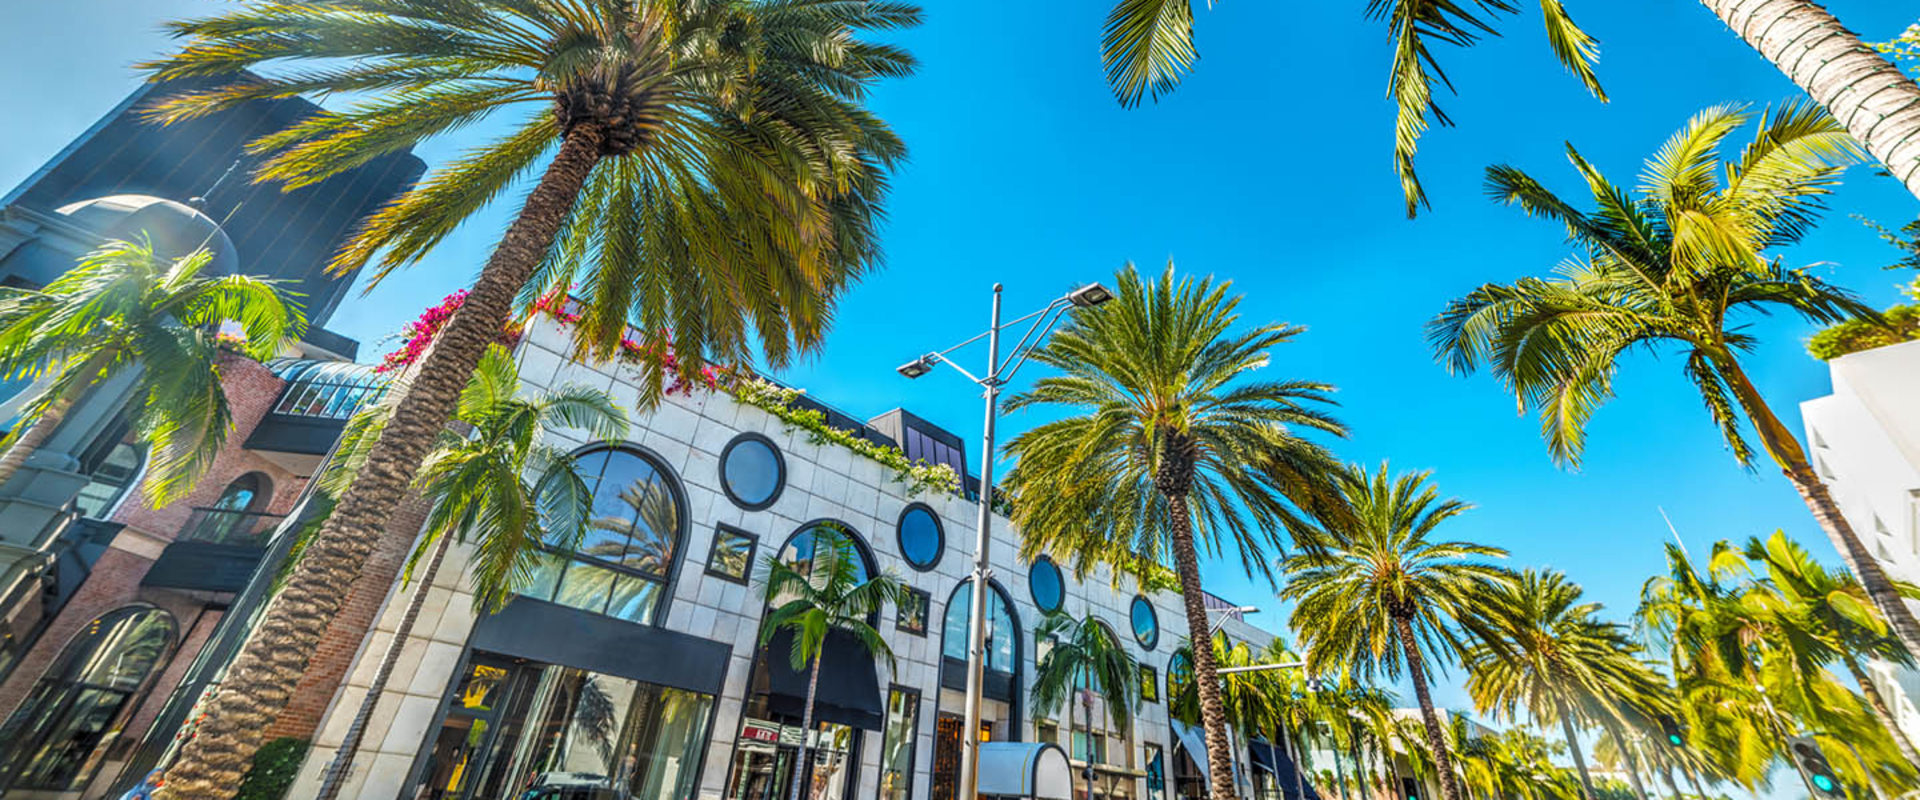 Does beverly hills have rent control?